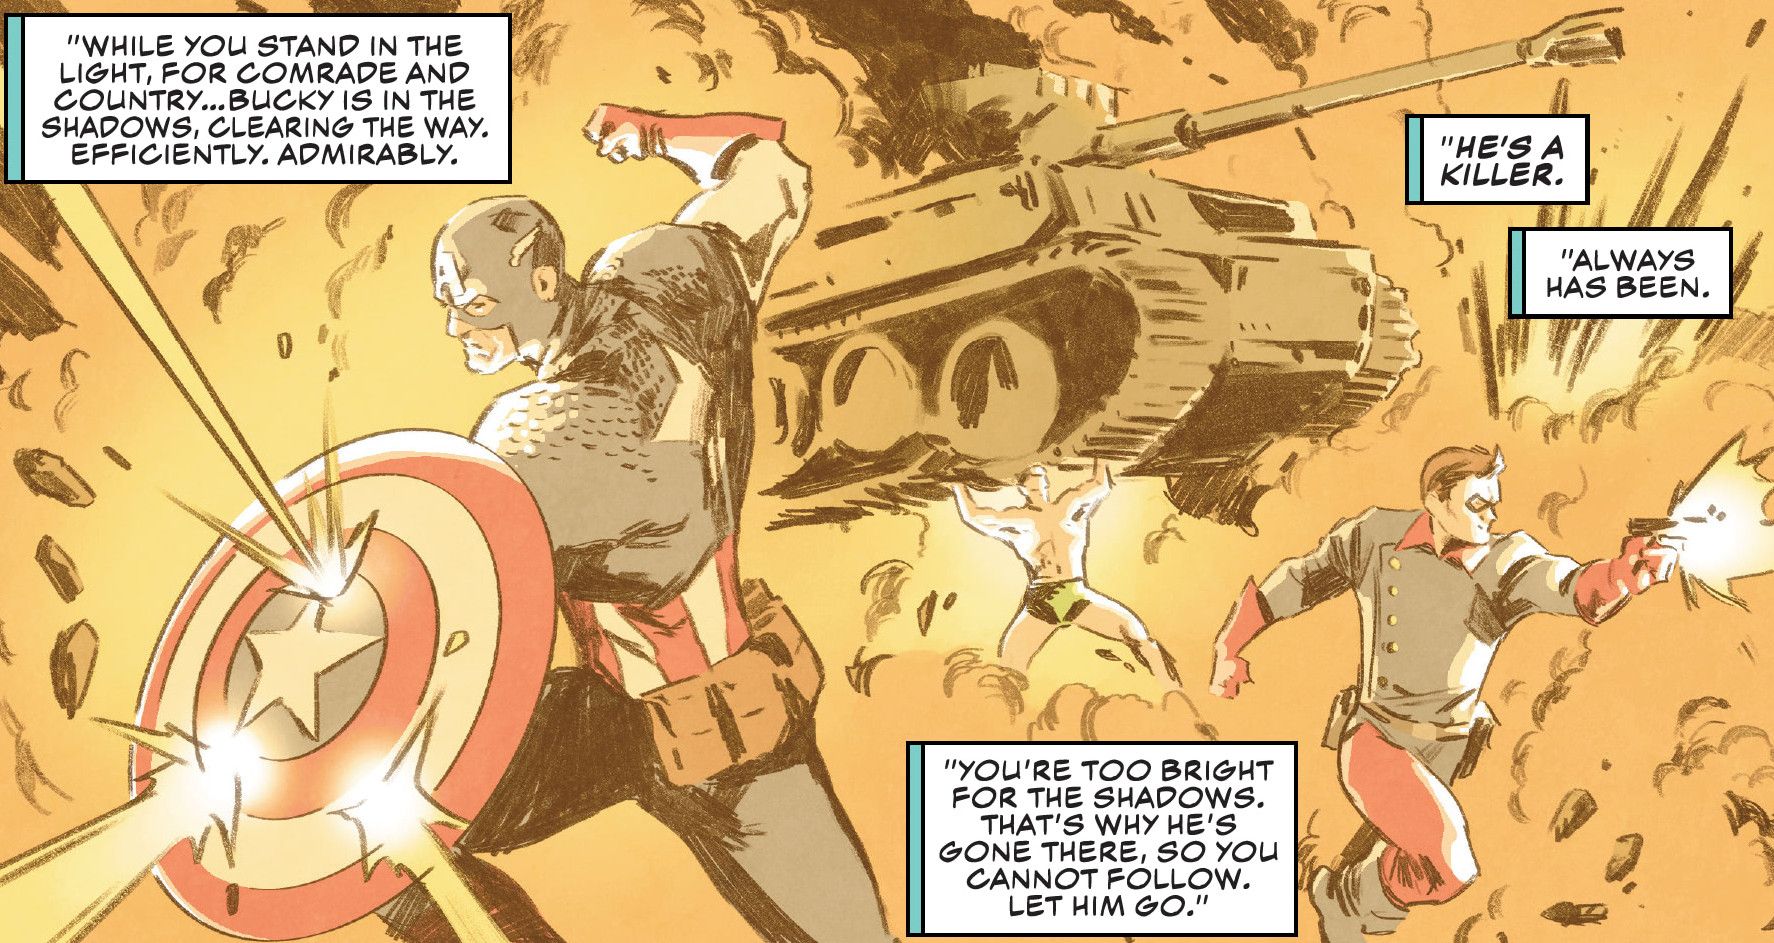 Captain America & Bucky’s True Nature is Forever Changed By Marvel